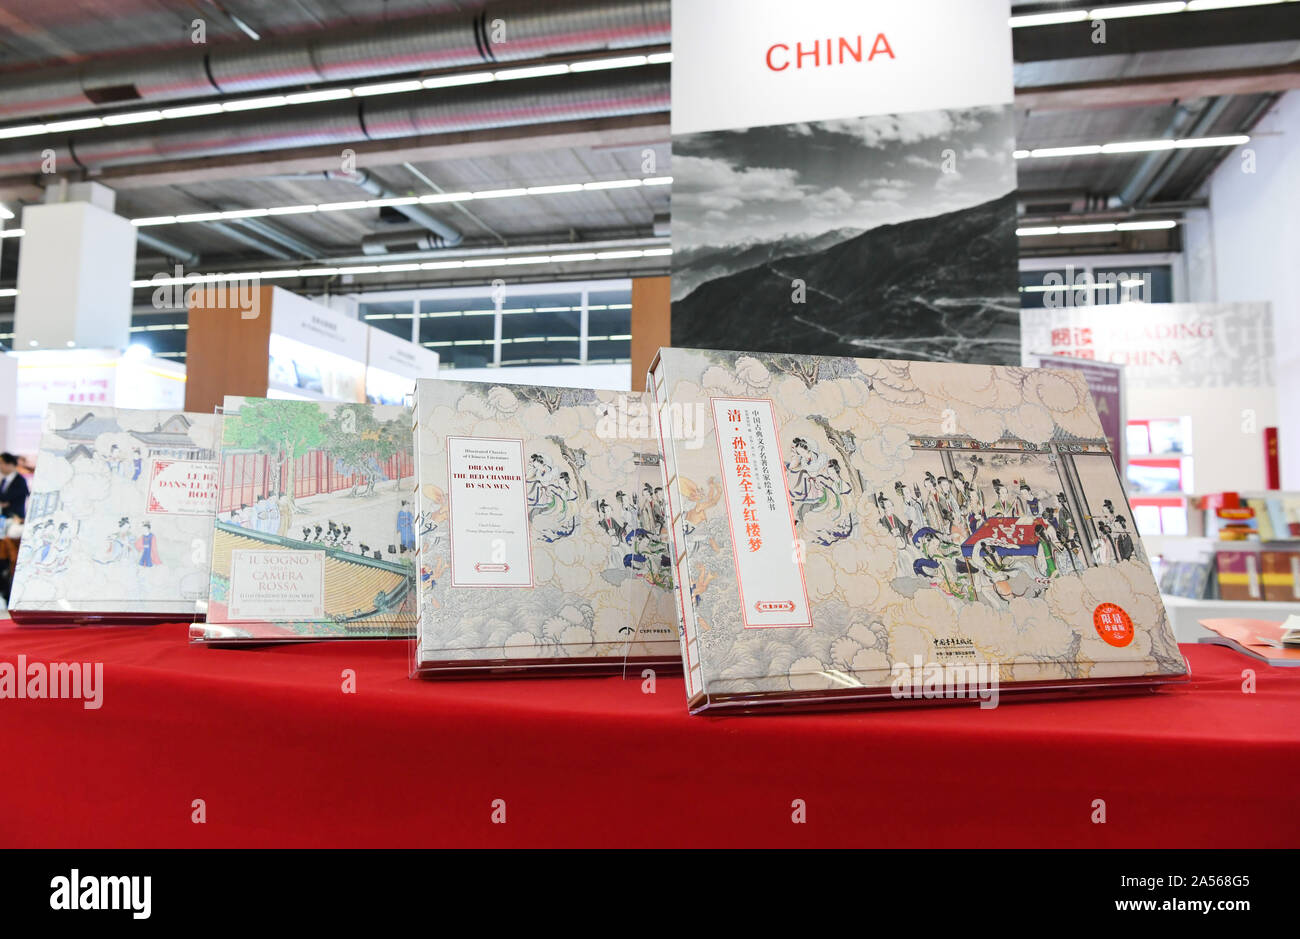 (191018) -- FRANKFURT, Oct. 18, 2019 (Xinhua) -- Photo taken on Oct. 17, 2019 shows limited editions in Chinese, English, Italian and French (R to L) of 'Illustrated Classics of Chinese Literature: Dream of the Red Chamber by Sun Wen' at Frankfurt Book Fair in Frankfurt, Germany. Modern prints of an ancient illustrated version of the Chinese literary classic 'Dream of the Red Chamber' were launched globally Thursday at the annual Frankfurt Book Fair in multilingual limited editions.   'Dream of the Red Chamber,' written by Cao Xueqin in the mid-18th century during the Qing Dynasty, is one of t Stock Photo